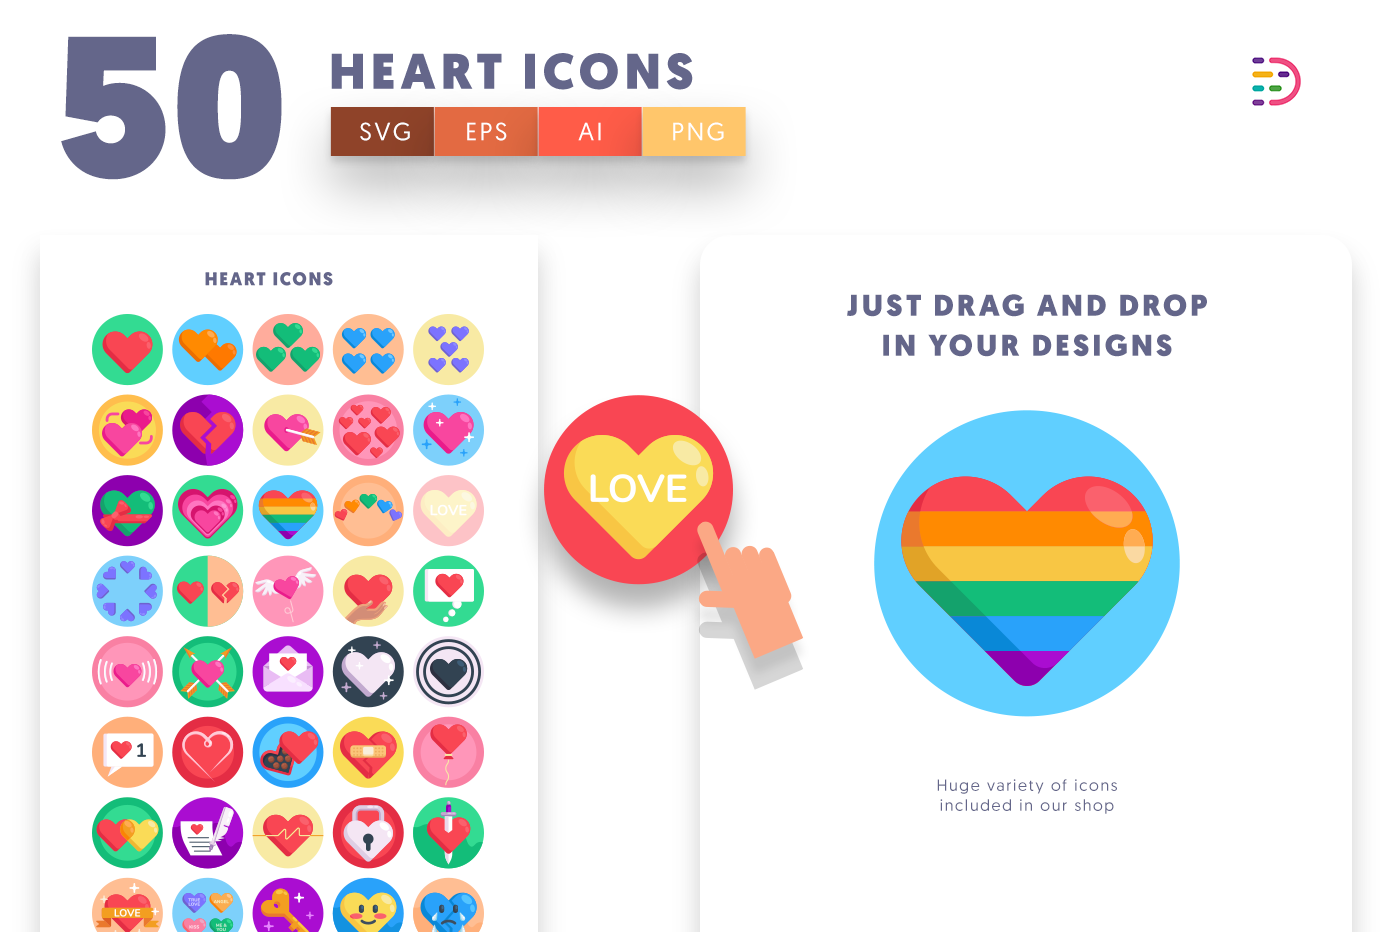 Drag and drop vector Heart Icons 